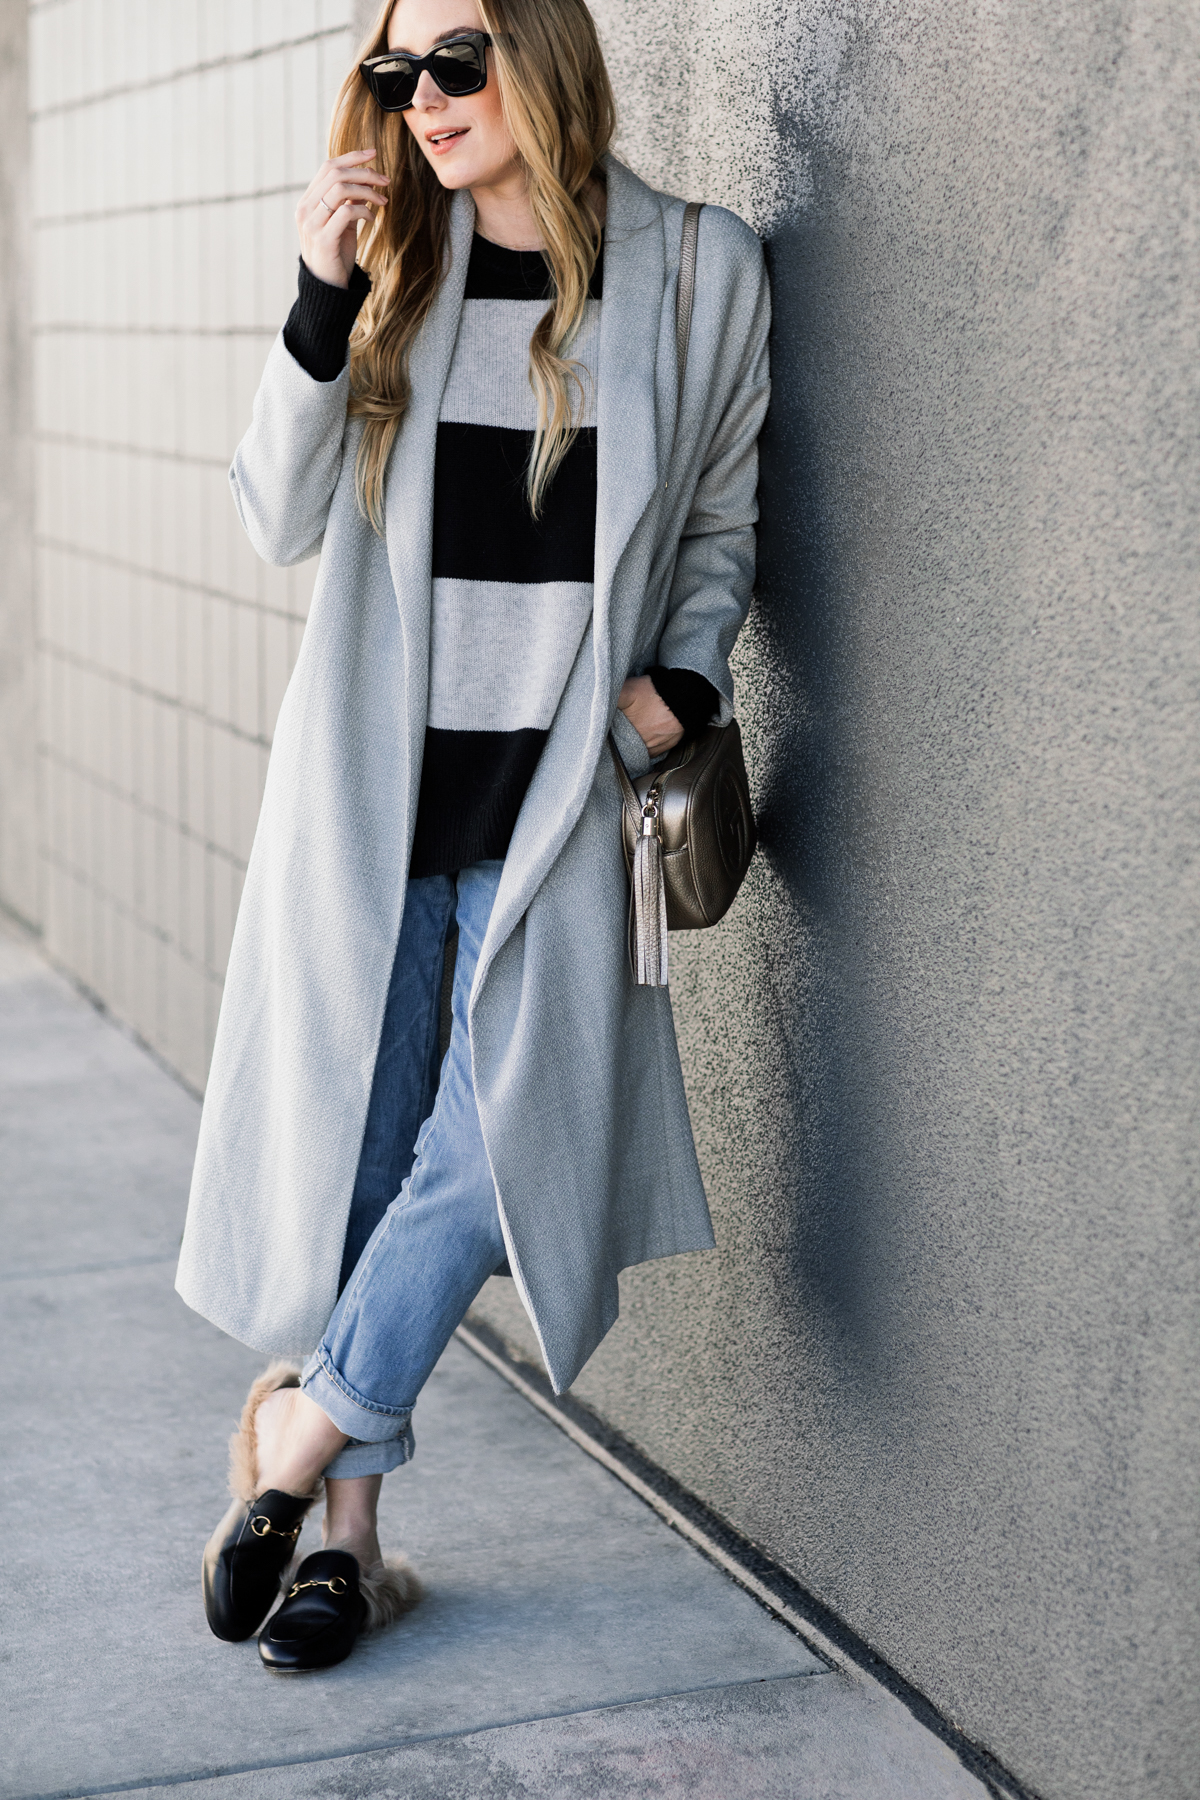 eatsleepwear, Kimberly Lapides, Outfit, Ayr, Ag, Gucci, 360 Sweater, Celine